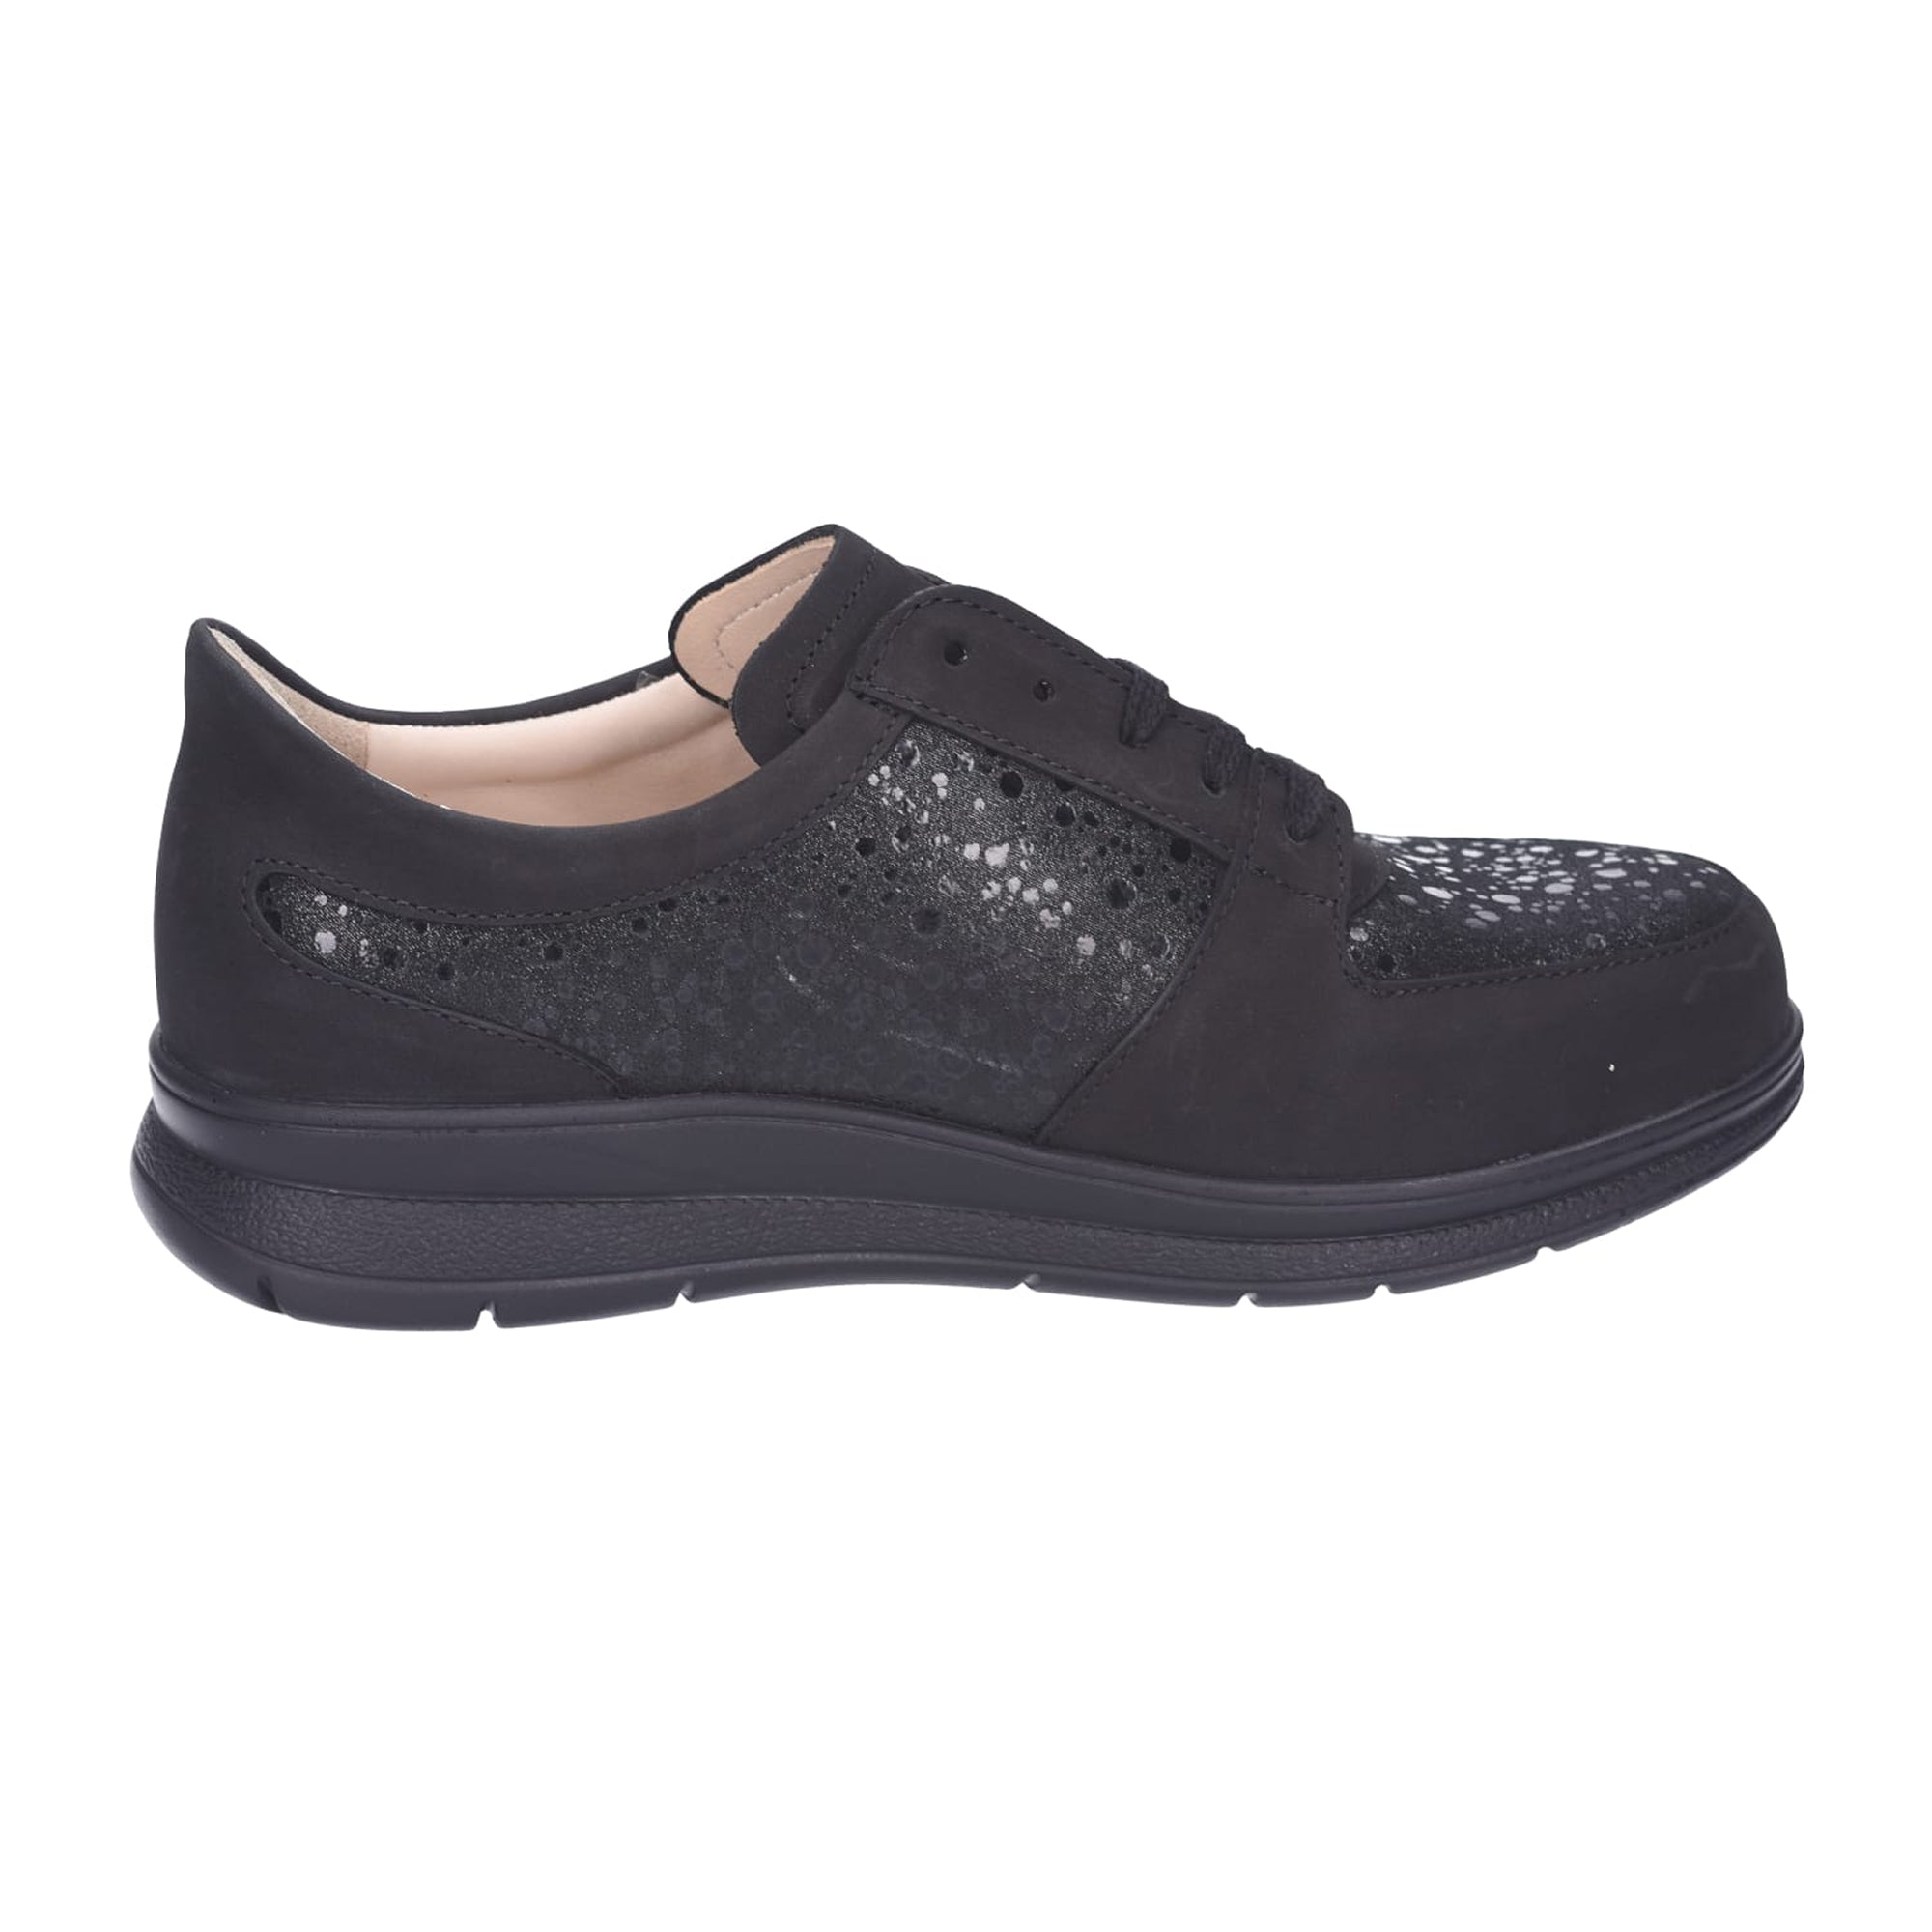 Finn Comfort Women's Black Lace-Up Shoes with Removable Insoles